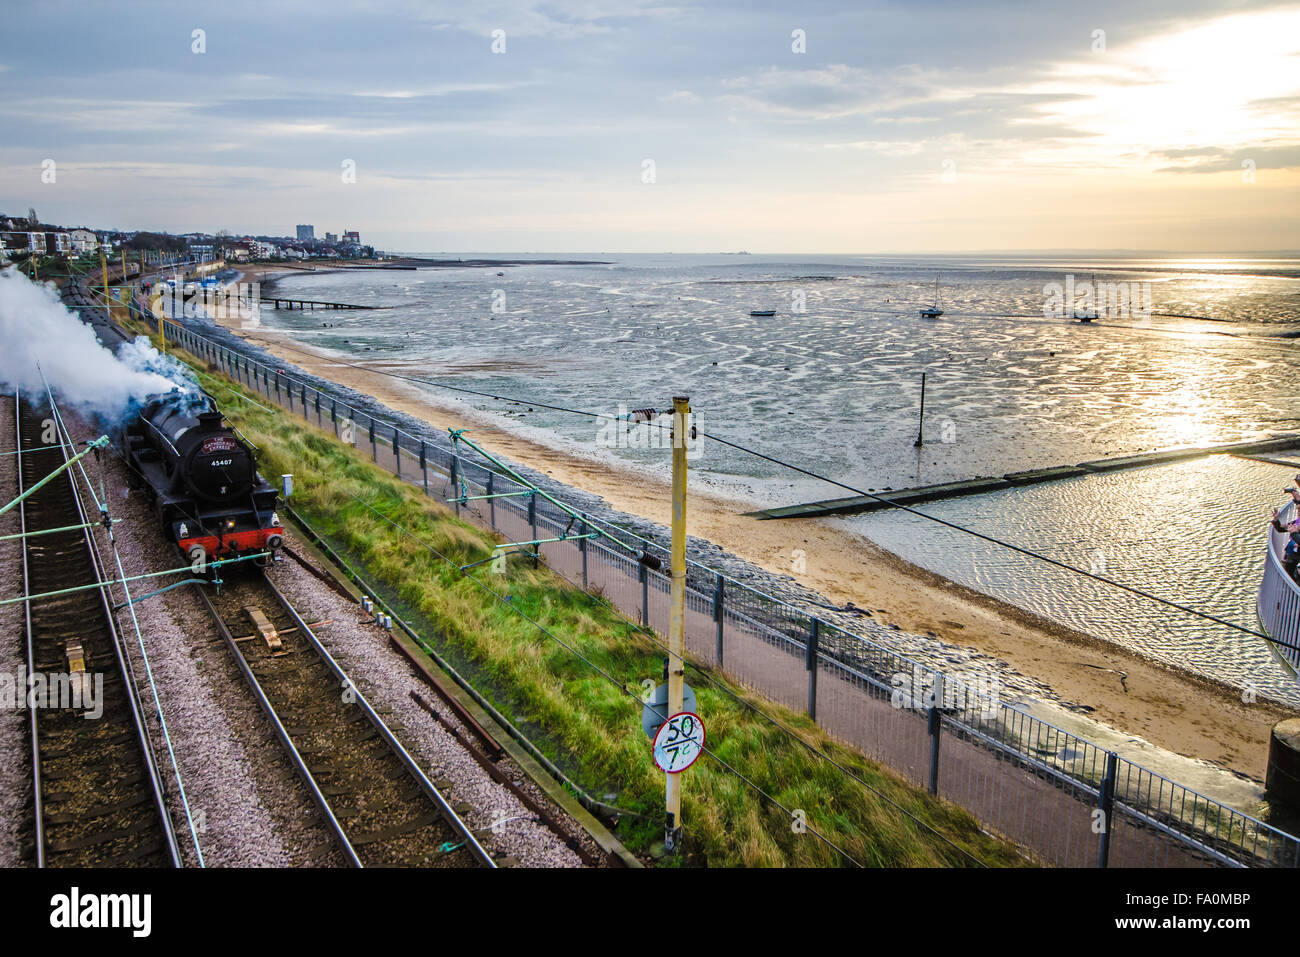 'The Cathedrals Express' - hauled by LMS Stanier Class 5 4-6-0 45407 'The Lancashire Fusilier' - 'Black 5'. Owned by railway engineering company Riley and Son. Seen here passing through Chalkwell along the Thames estuary at sunrise Stock Photo